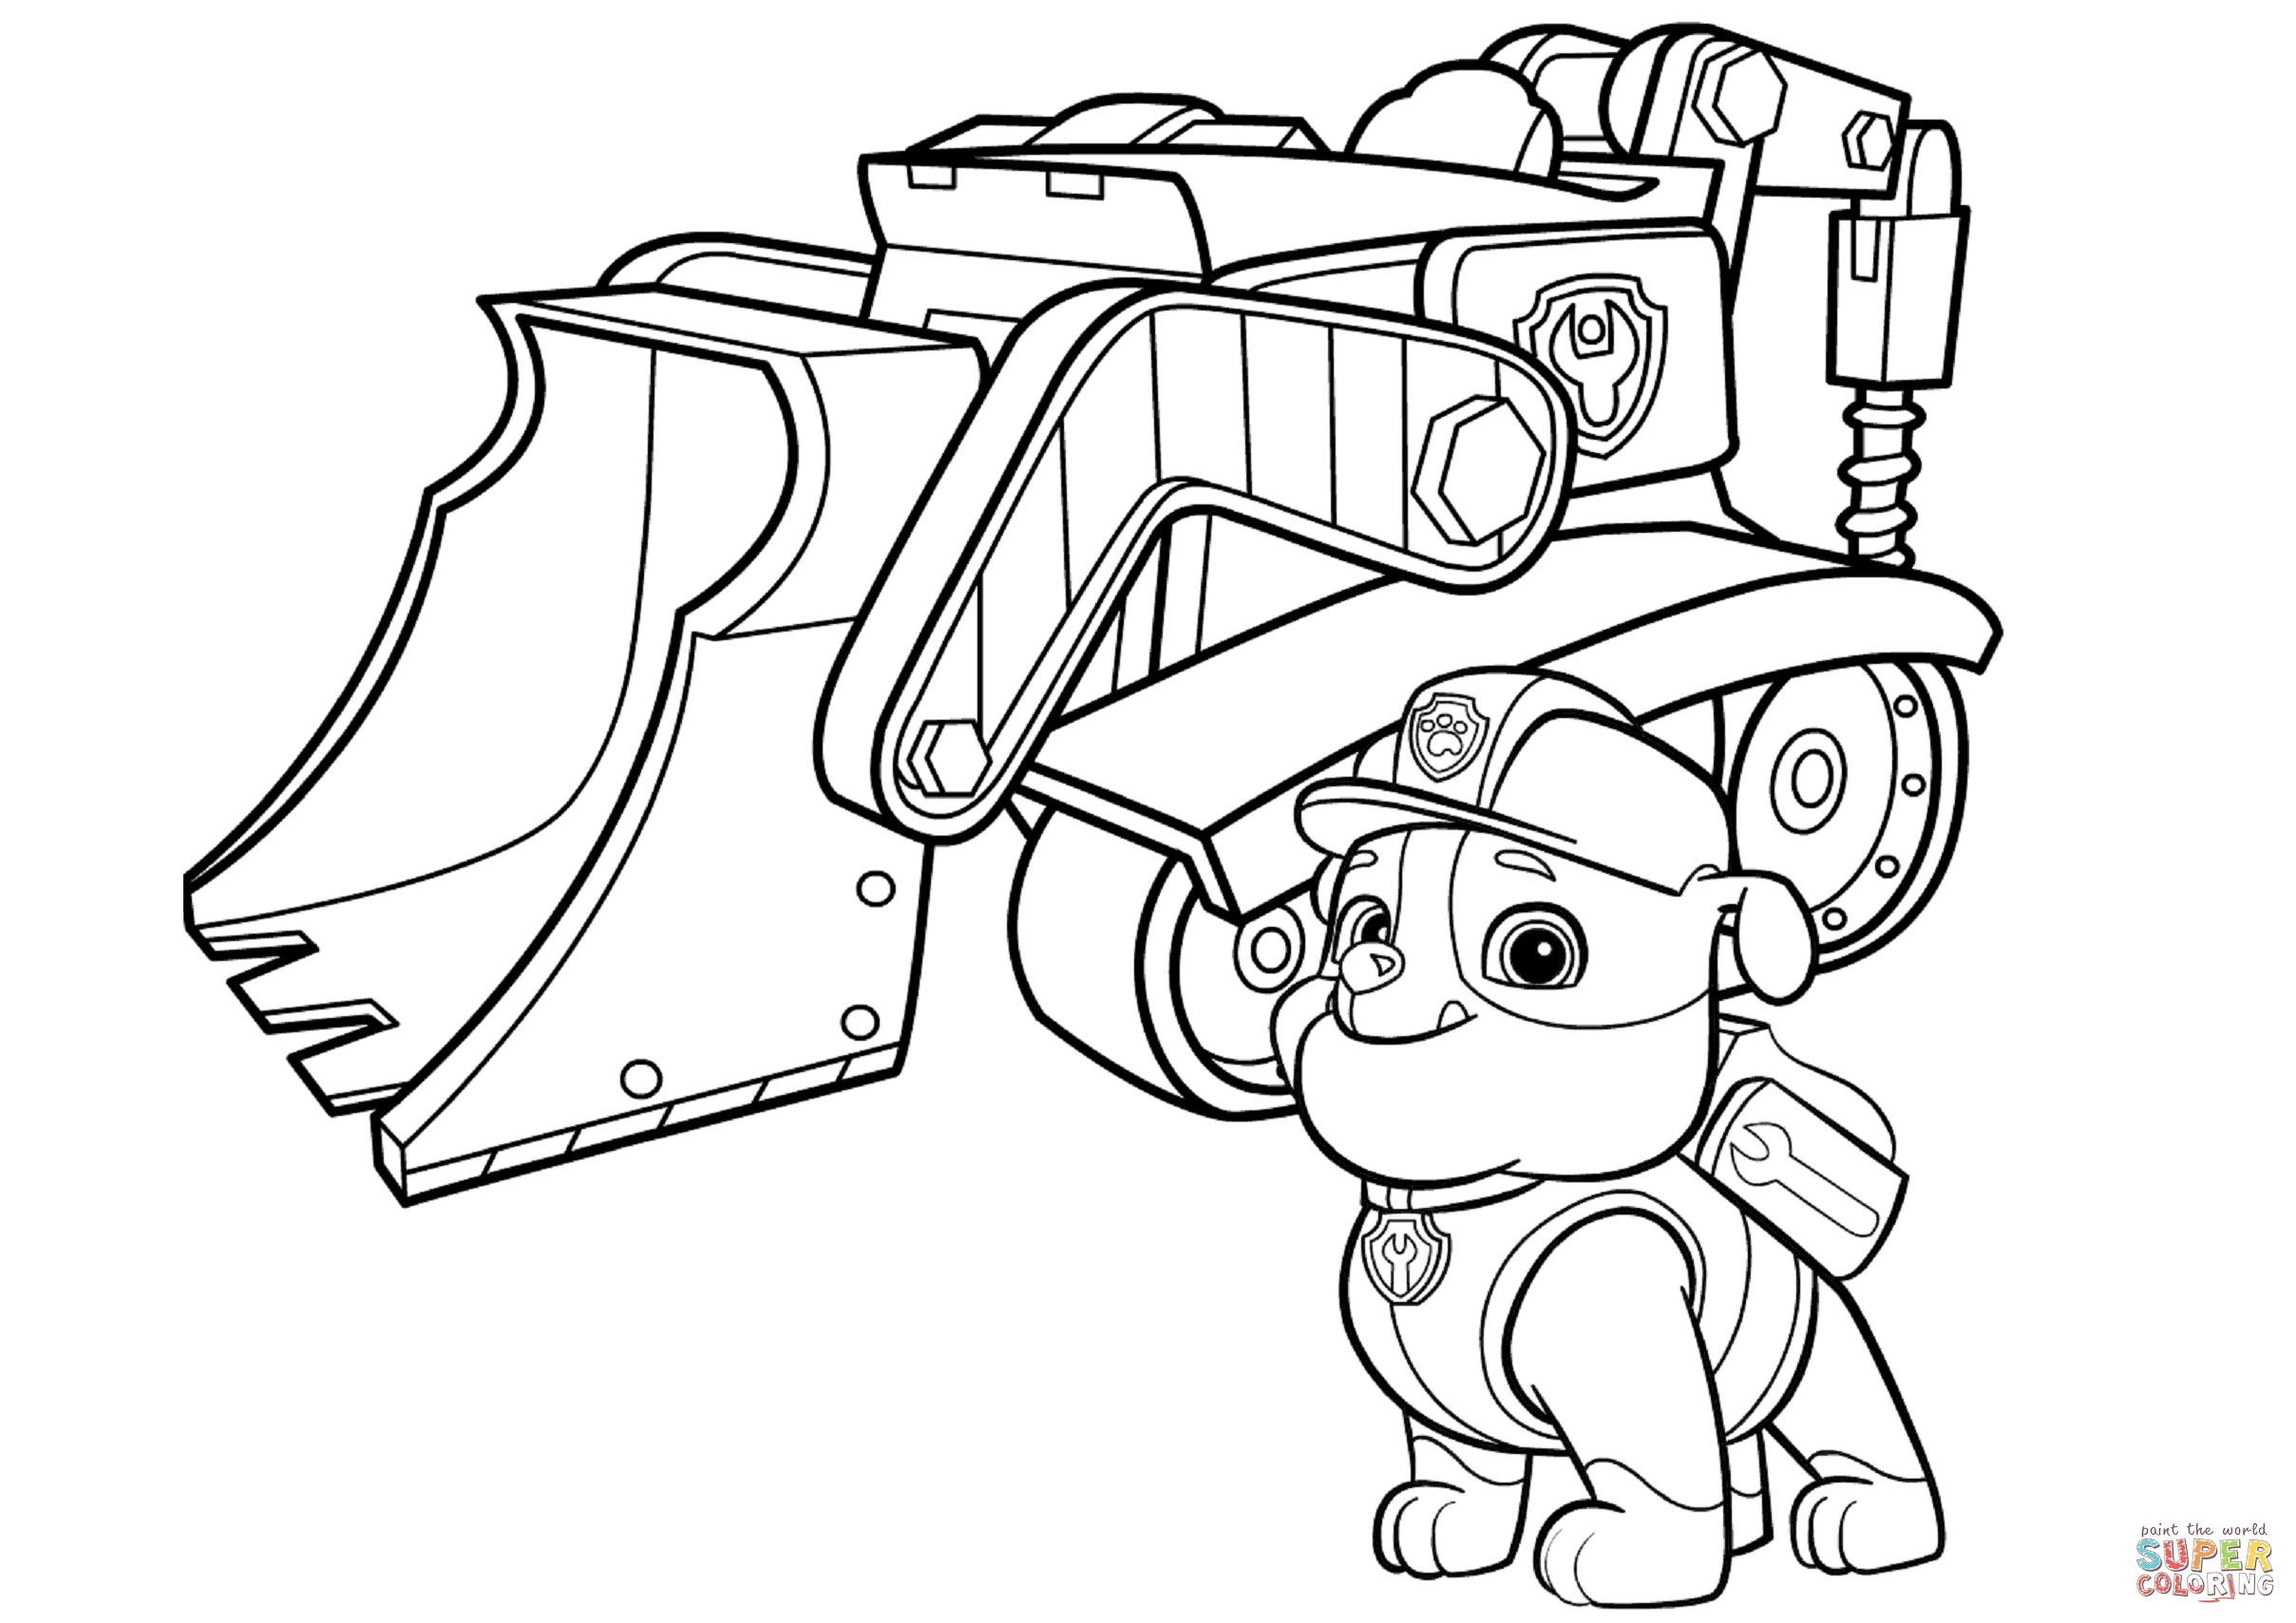 Paw Patrol Rubble's Bulldozer Coloring Page | Free ... - Coloring Home